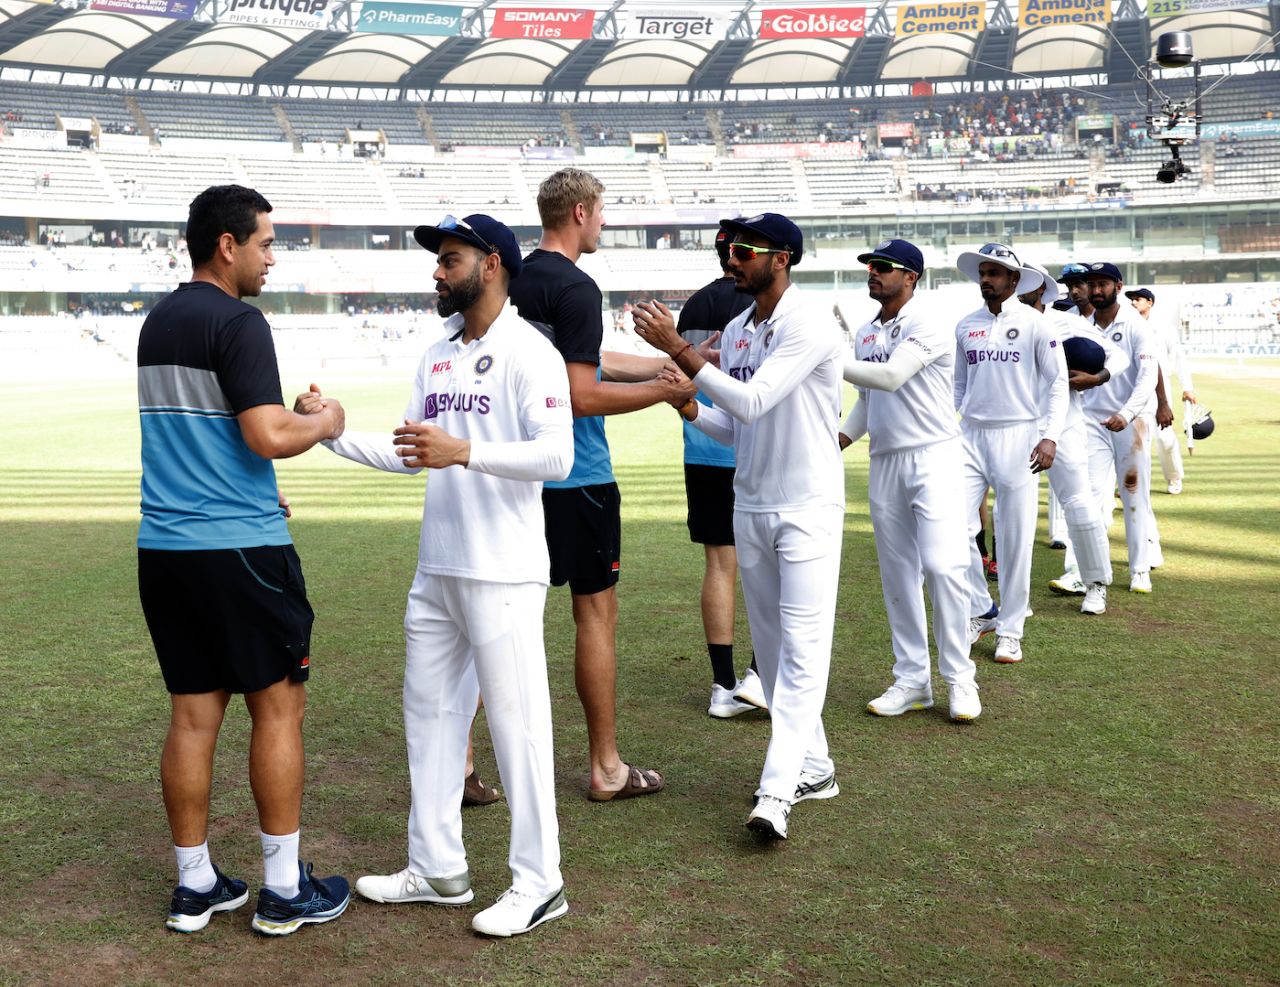 The two sets of players shake hands after the game, India vs New Zealand, 2nd Test, Mumbai,. 4th day, December 6, 2021